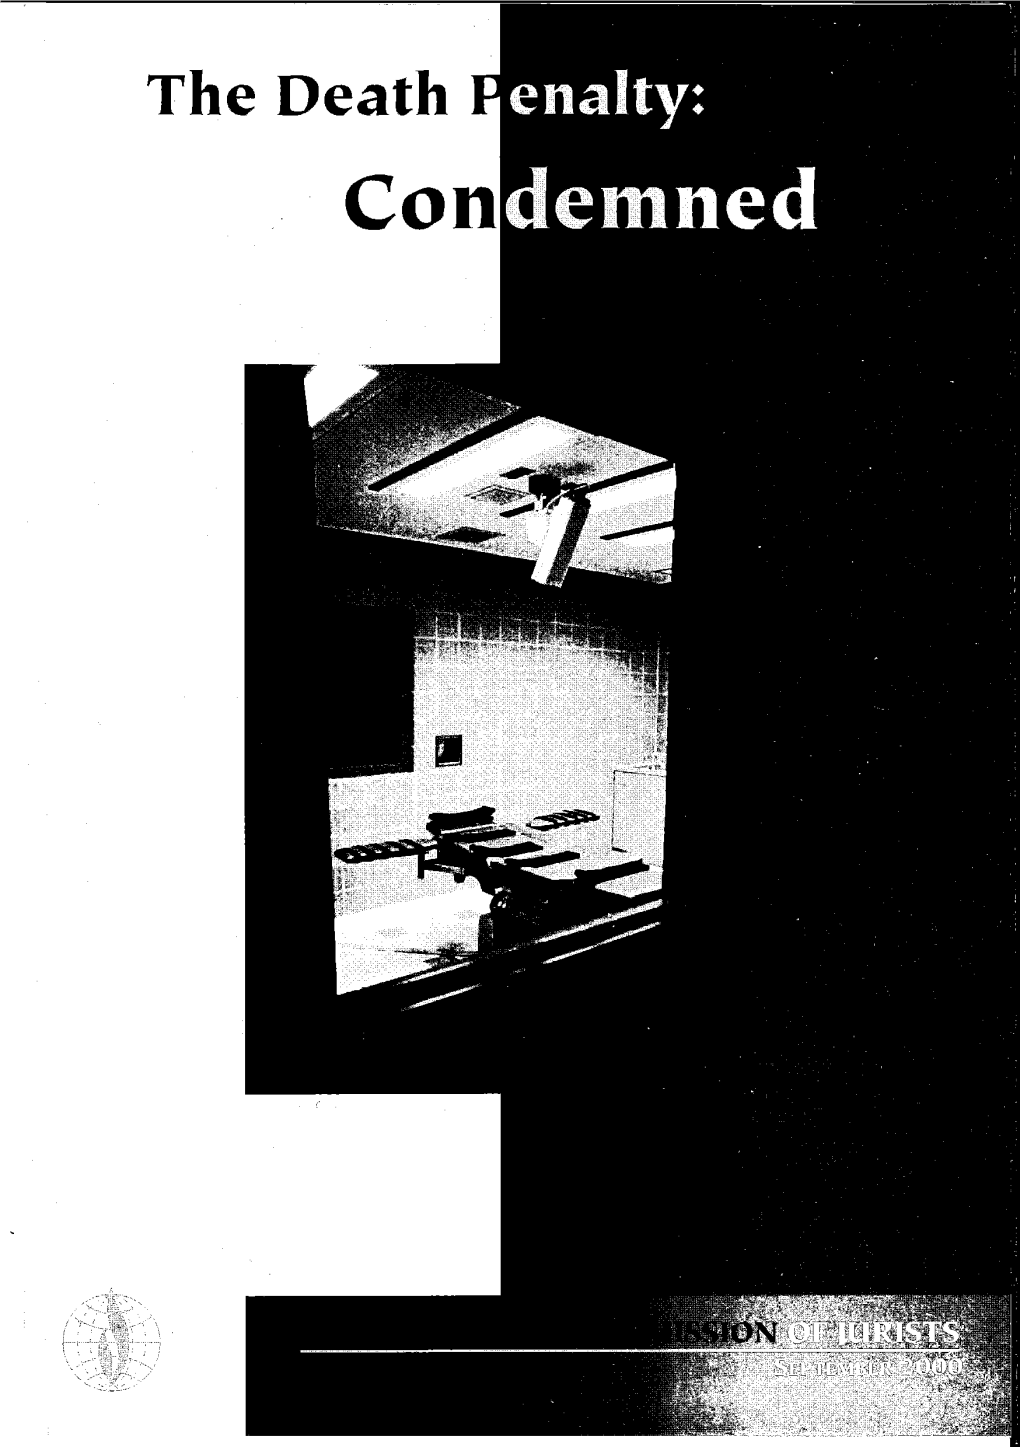 The Death Penalty: Condemned